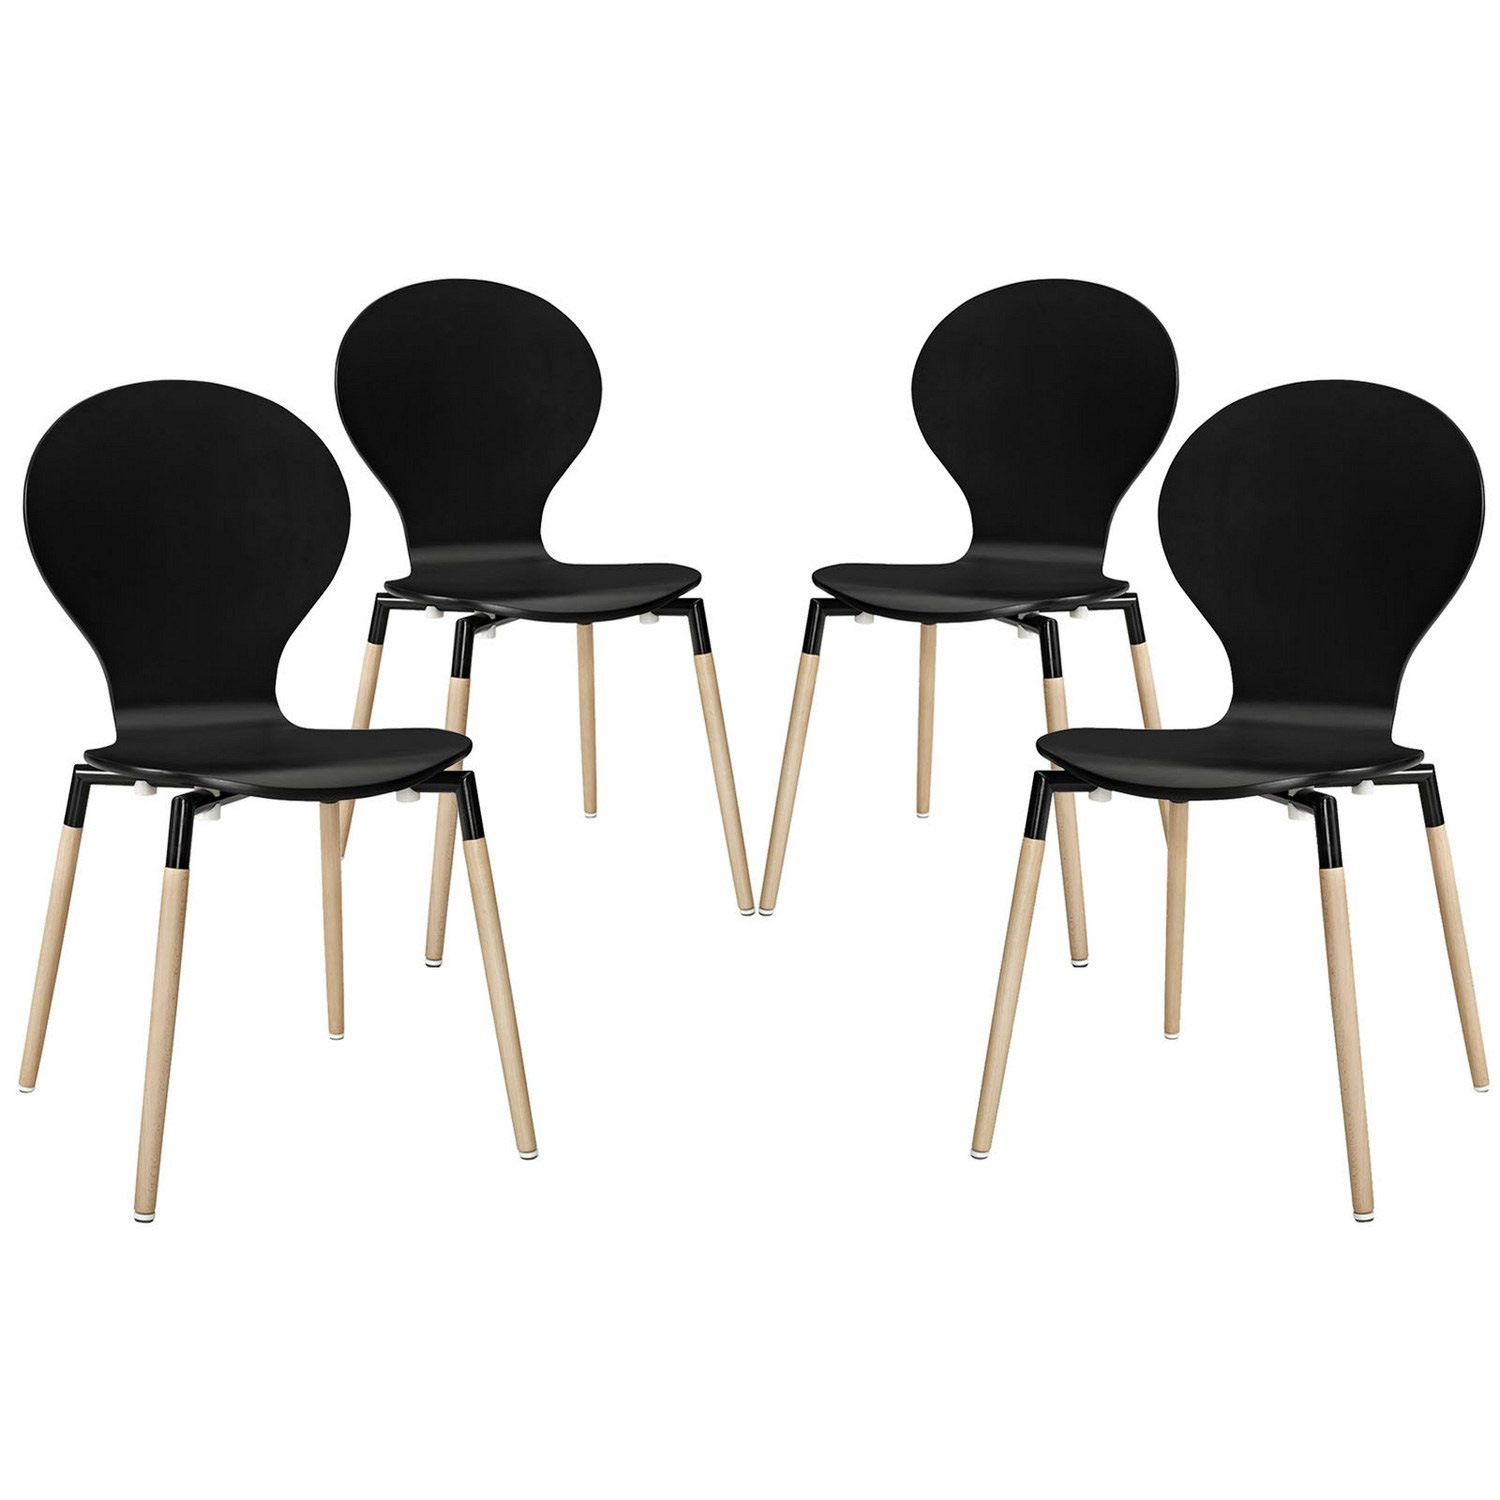 Modway Path Dining Chair Set of 4 - Black